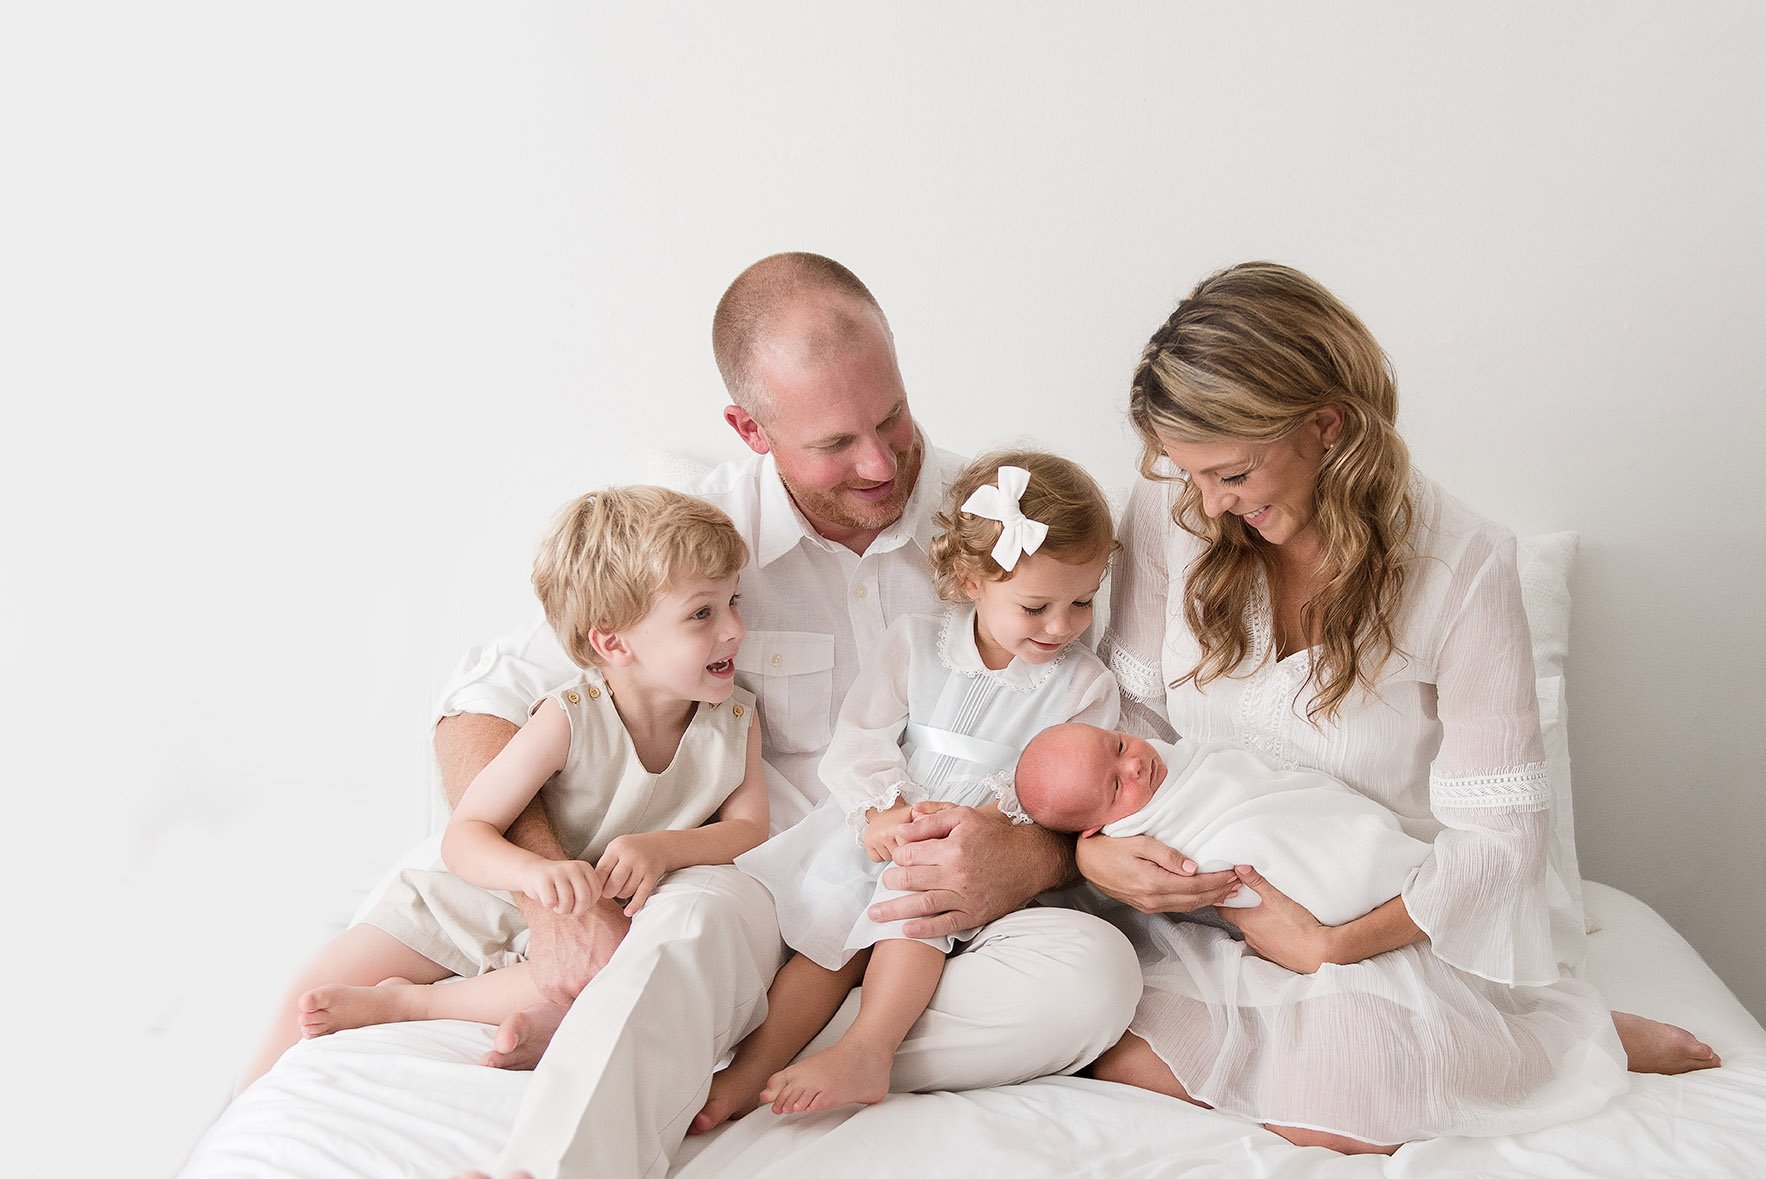 Child or Family Portrait Sessions » Meredith Klapp Photography